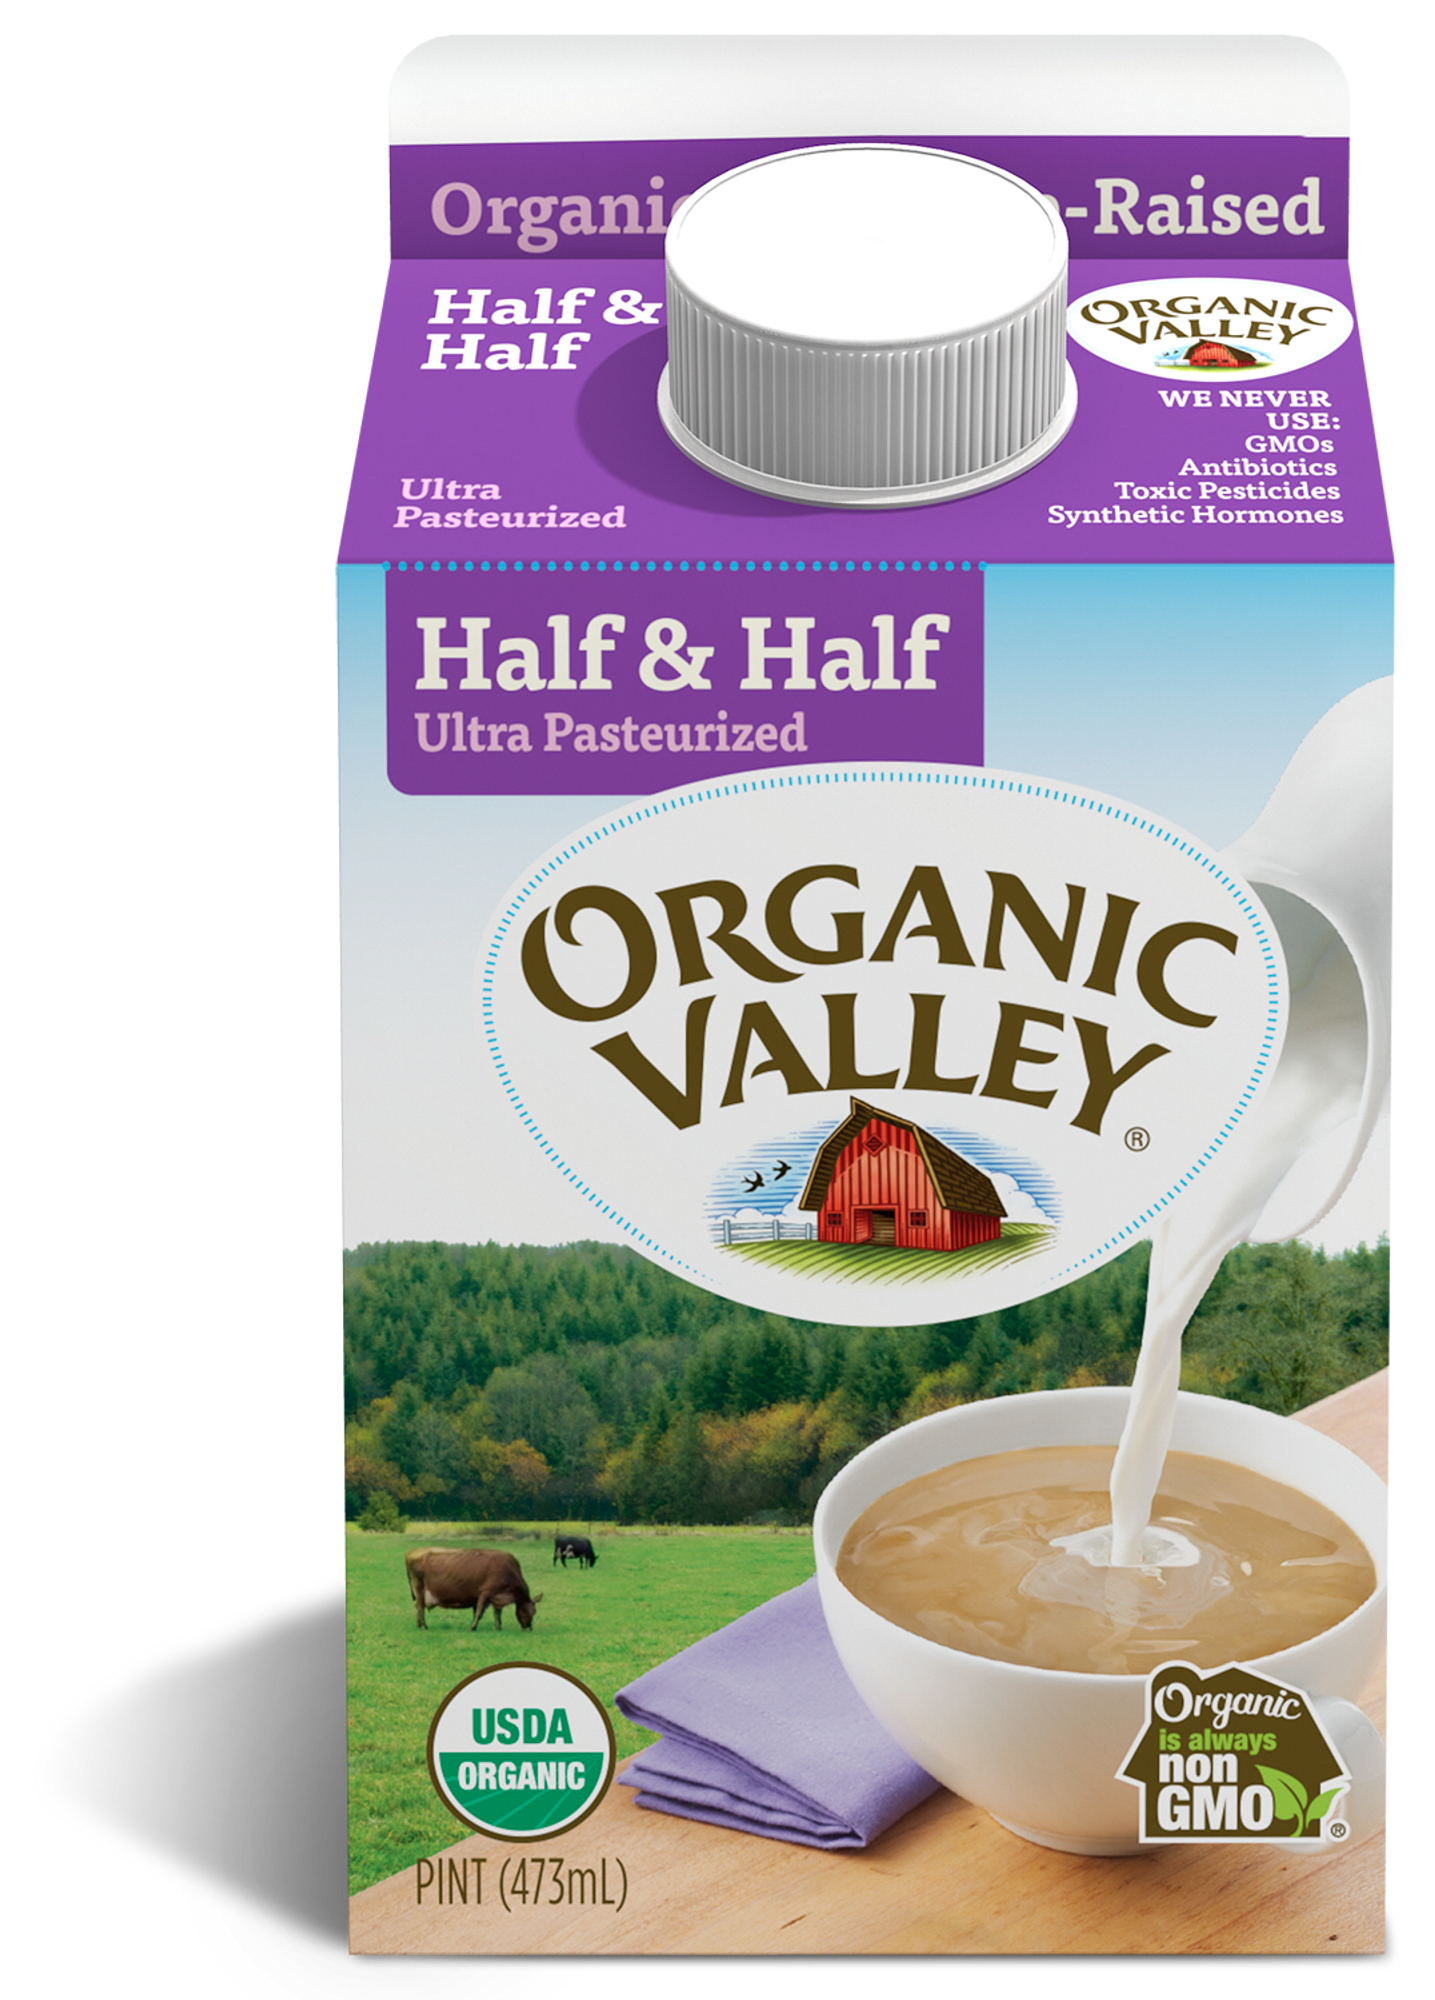 What Is Half-and-Half?